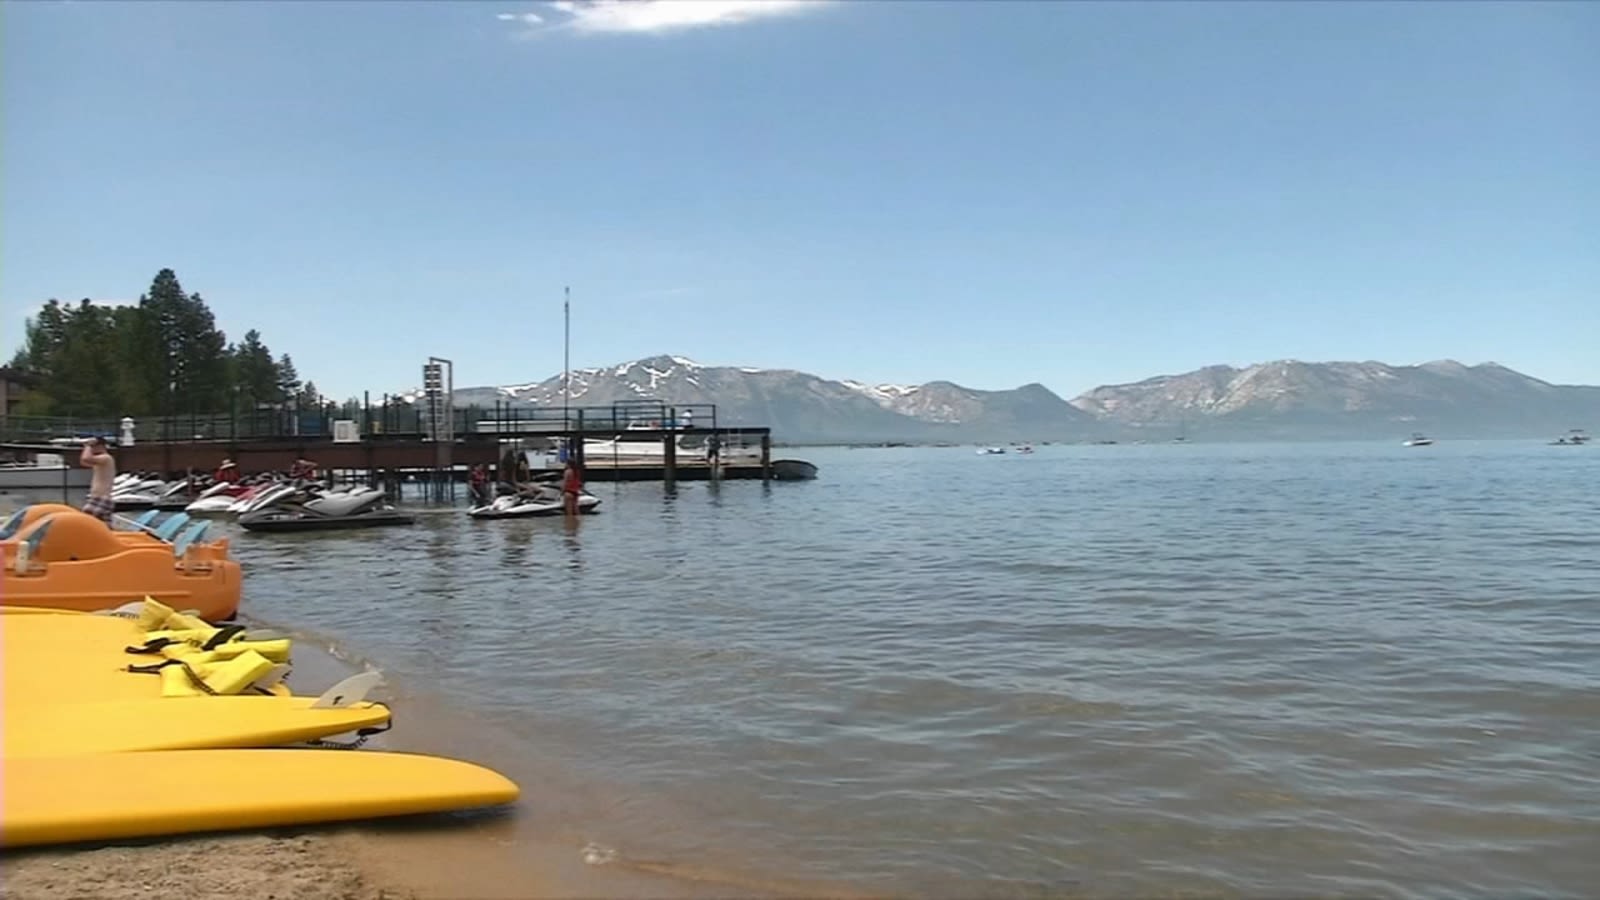 Lake Tahoe expected to fill up this spring due to snow melt and wet weather, officials say